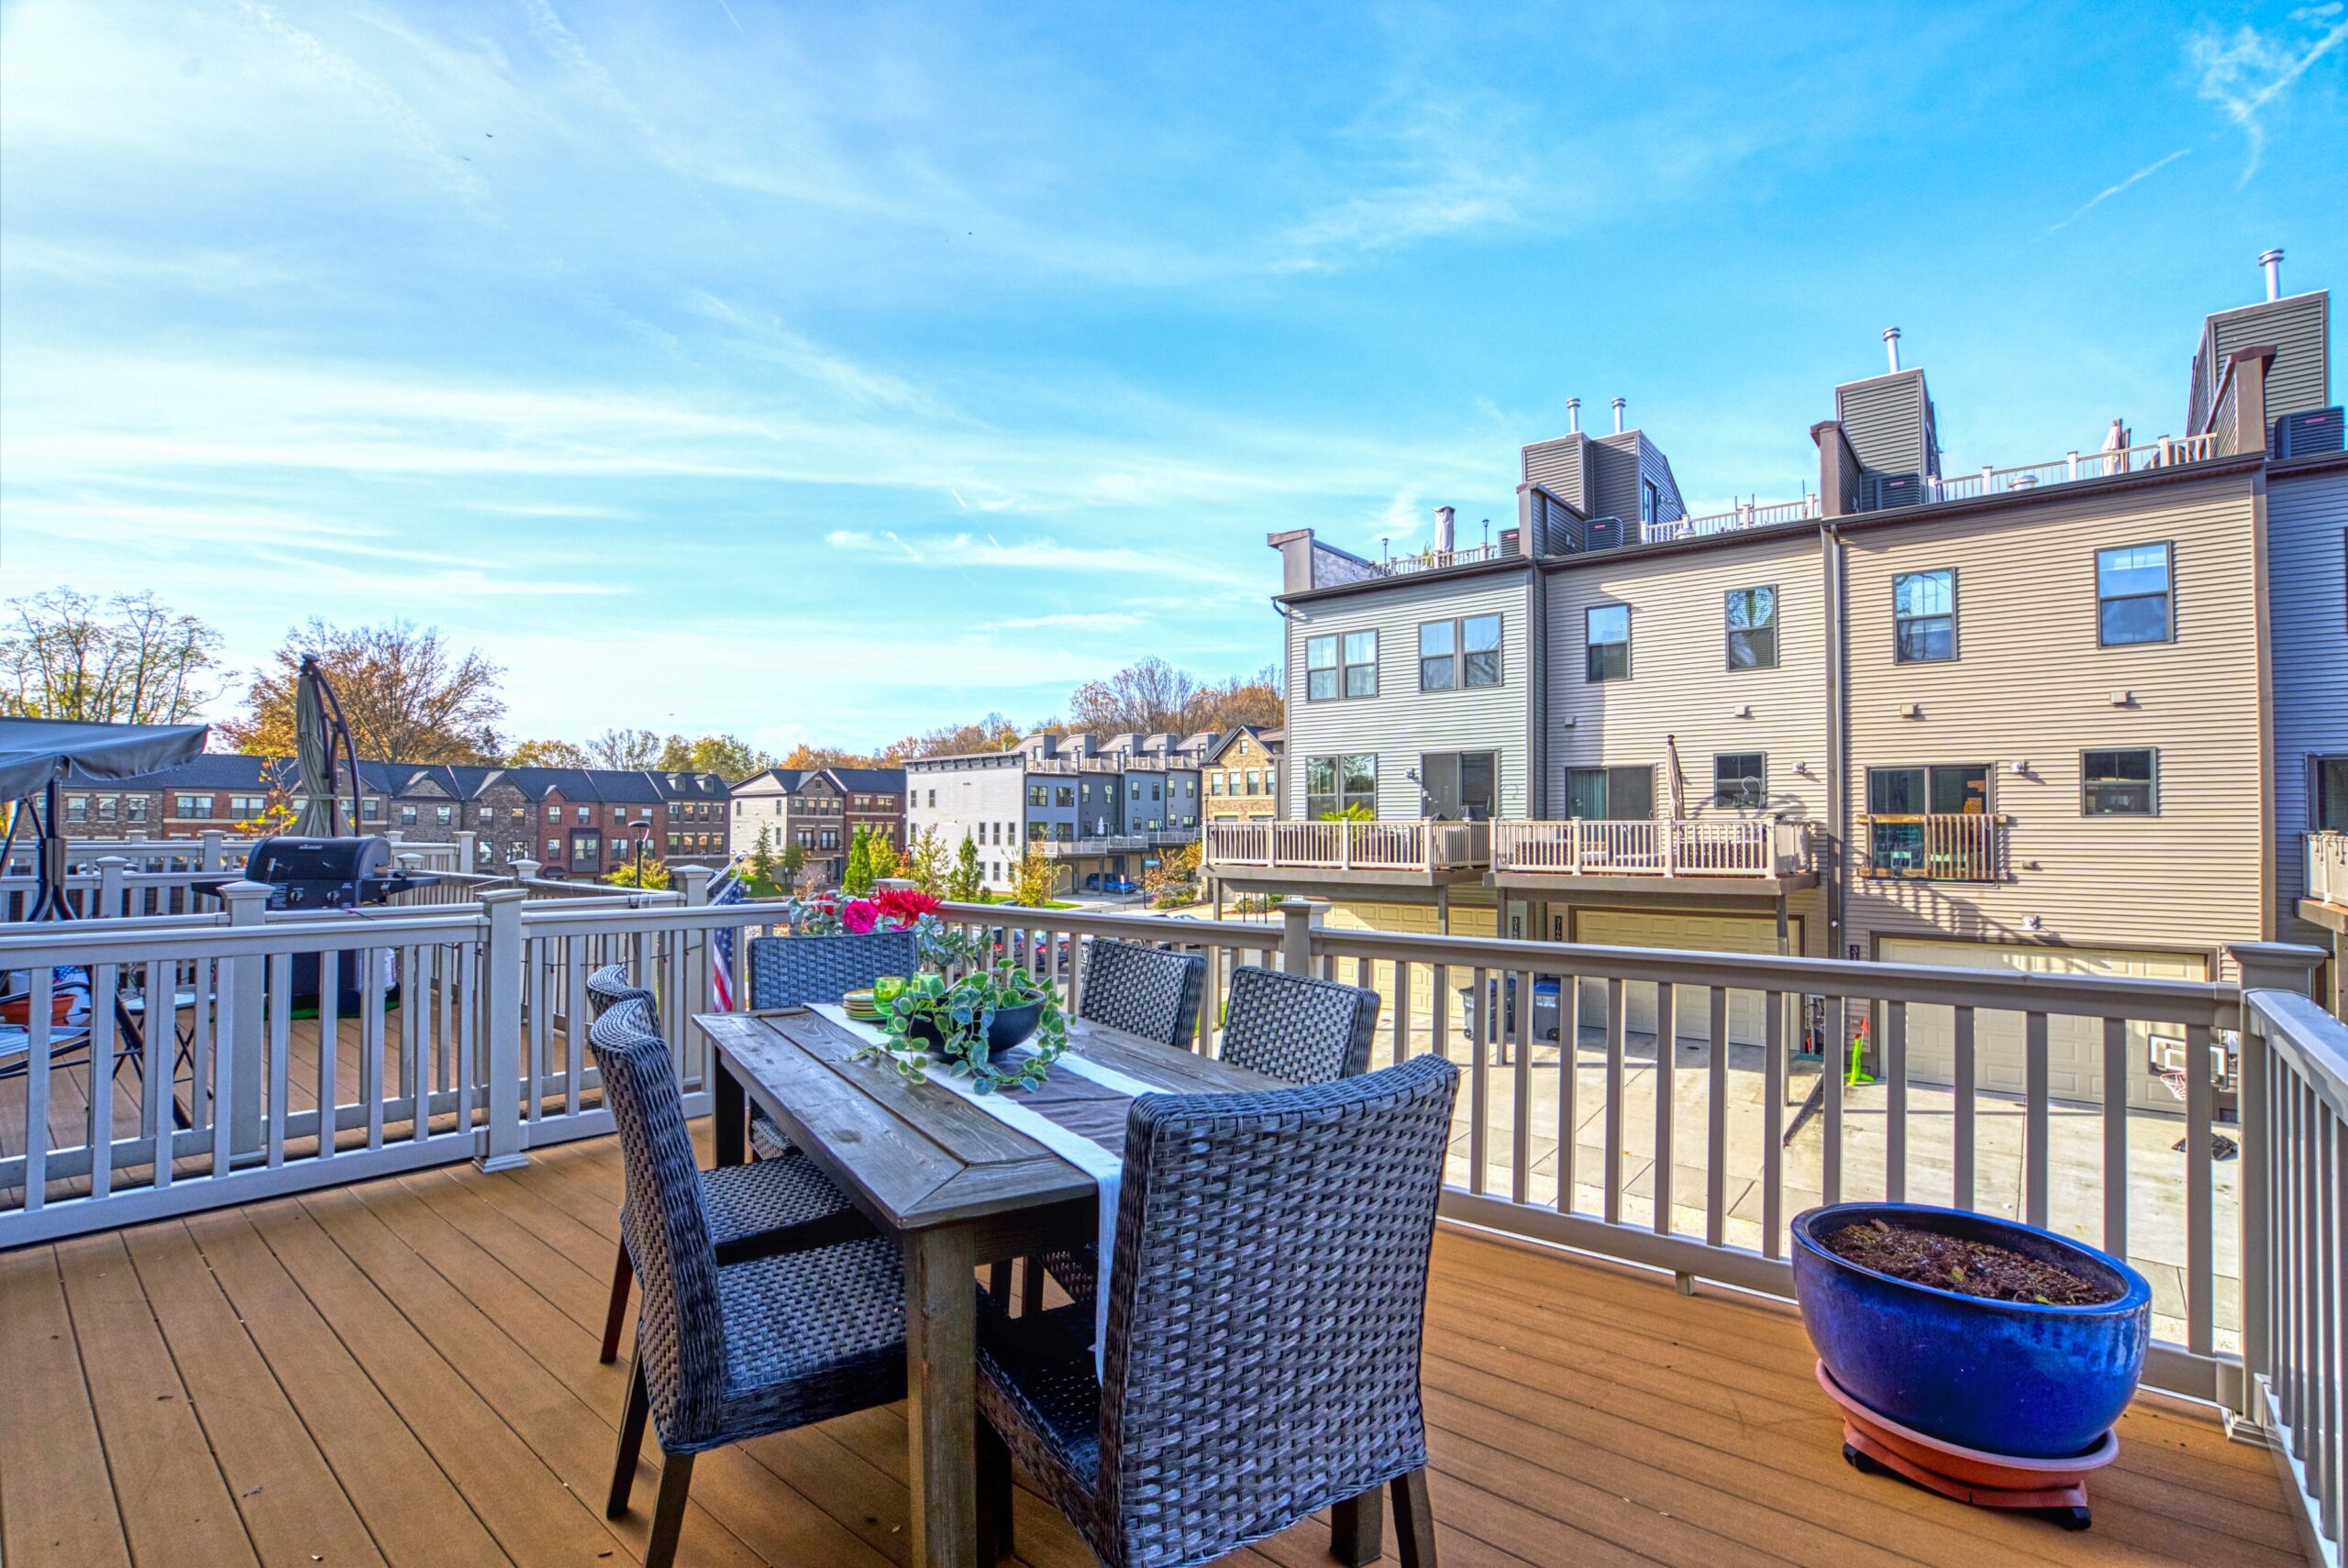 Professional exterior photo of 3165 Virginia Bluebell Ct, Fairfax - showing the rear deck and part of the view